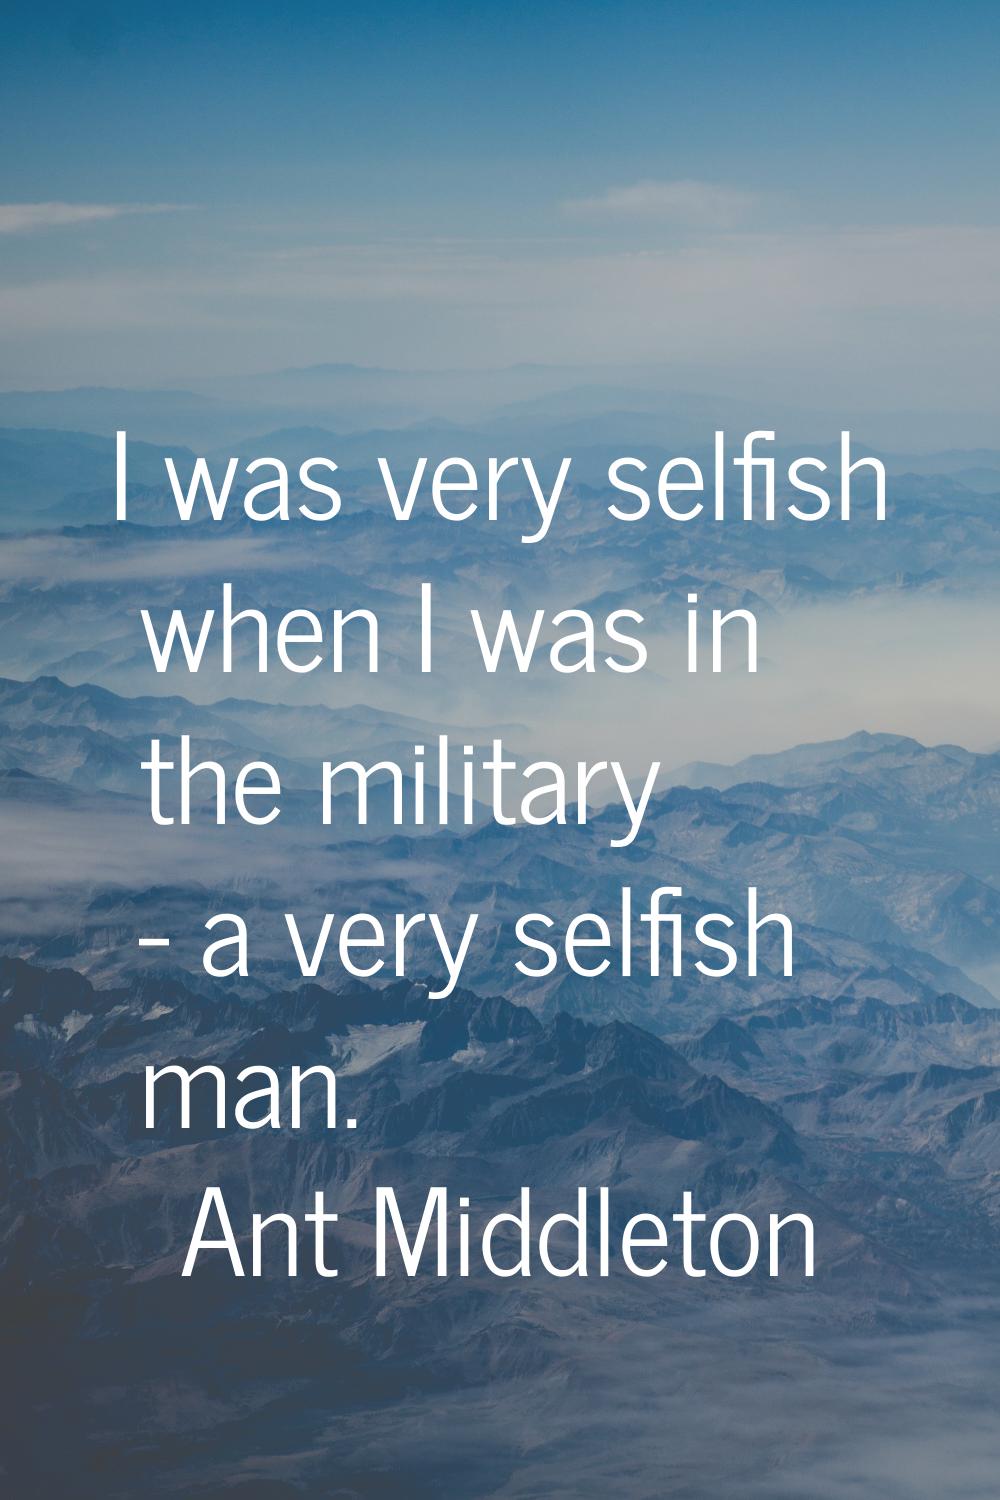 I was very selfish when I was in the military - a very selfish man.